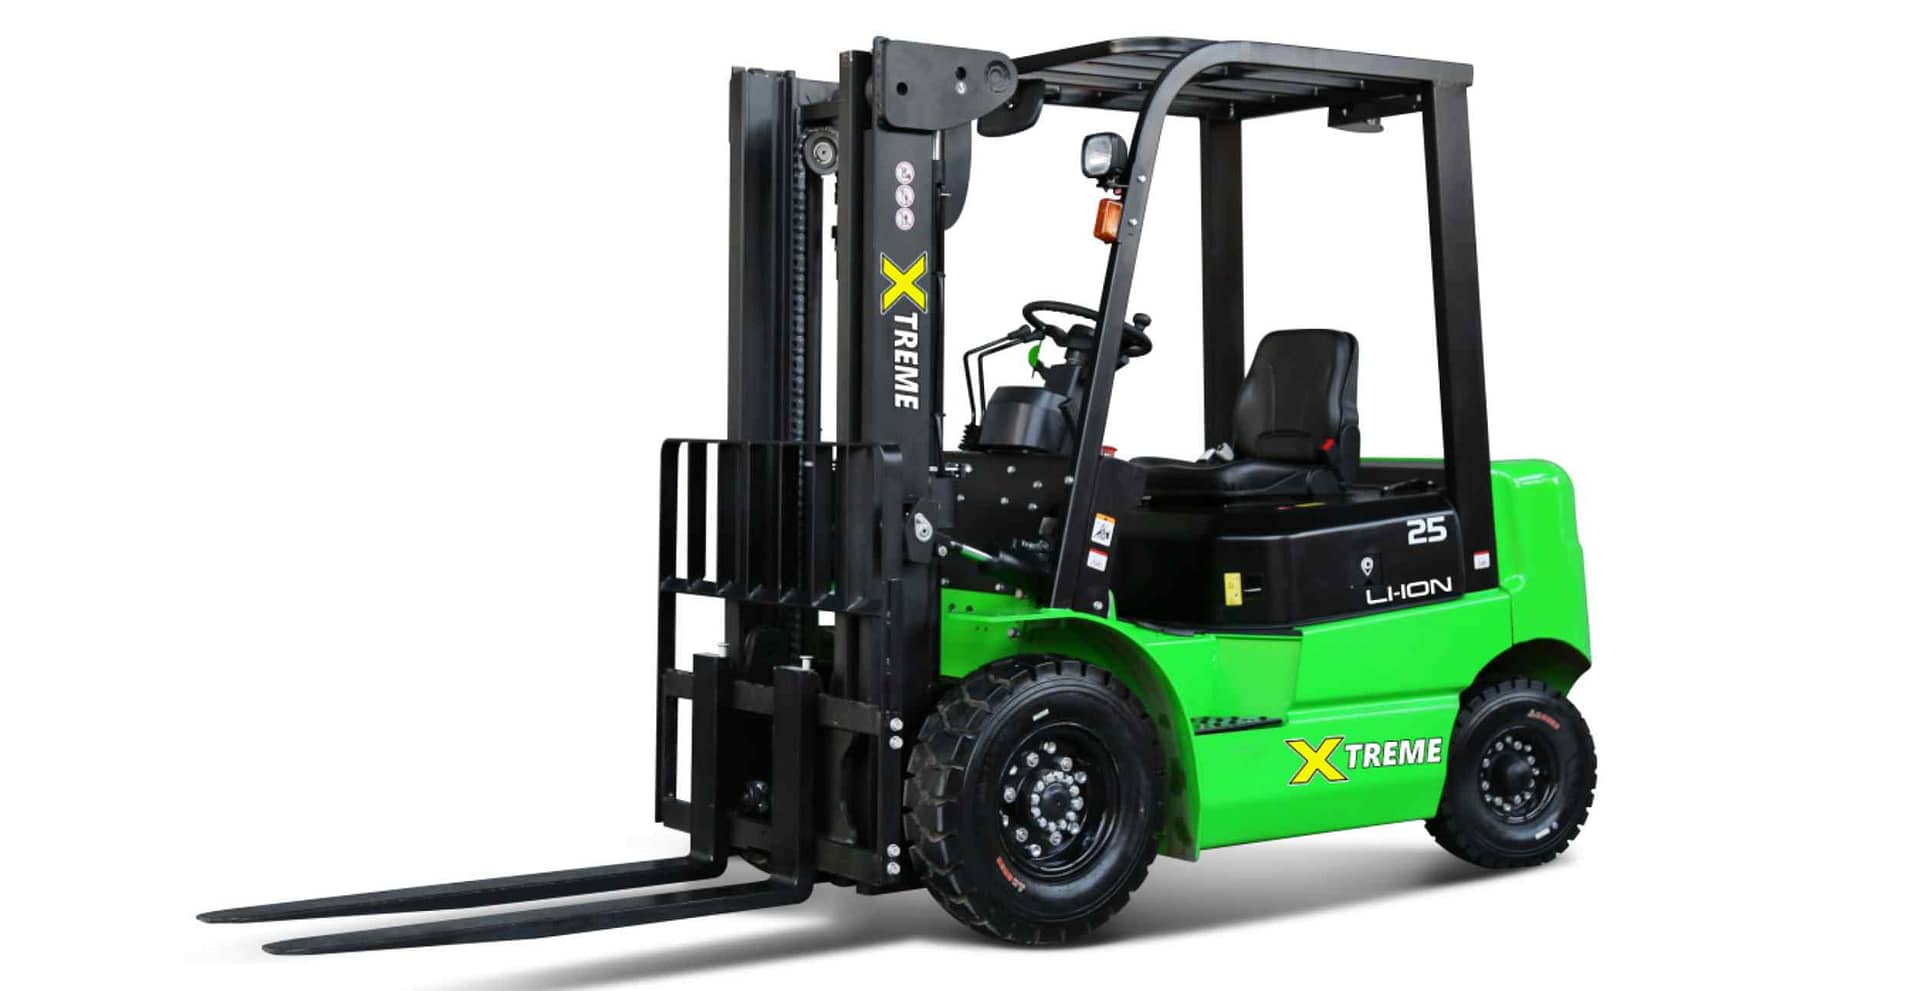 Xtreme 2.5t Lithium Electric iMOW Forklift